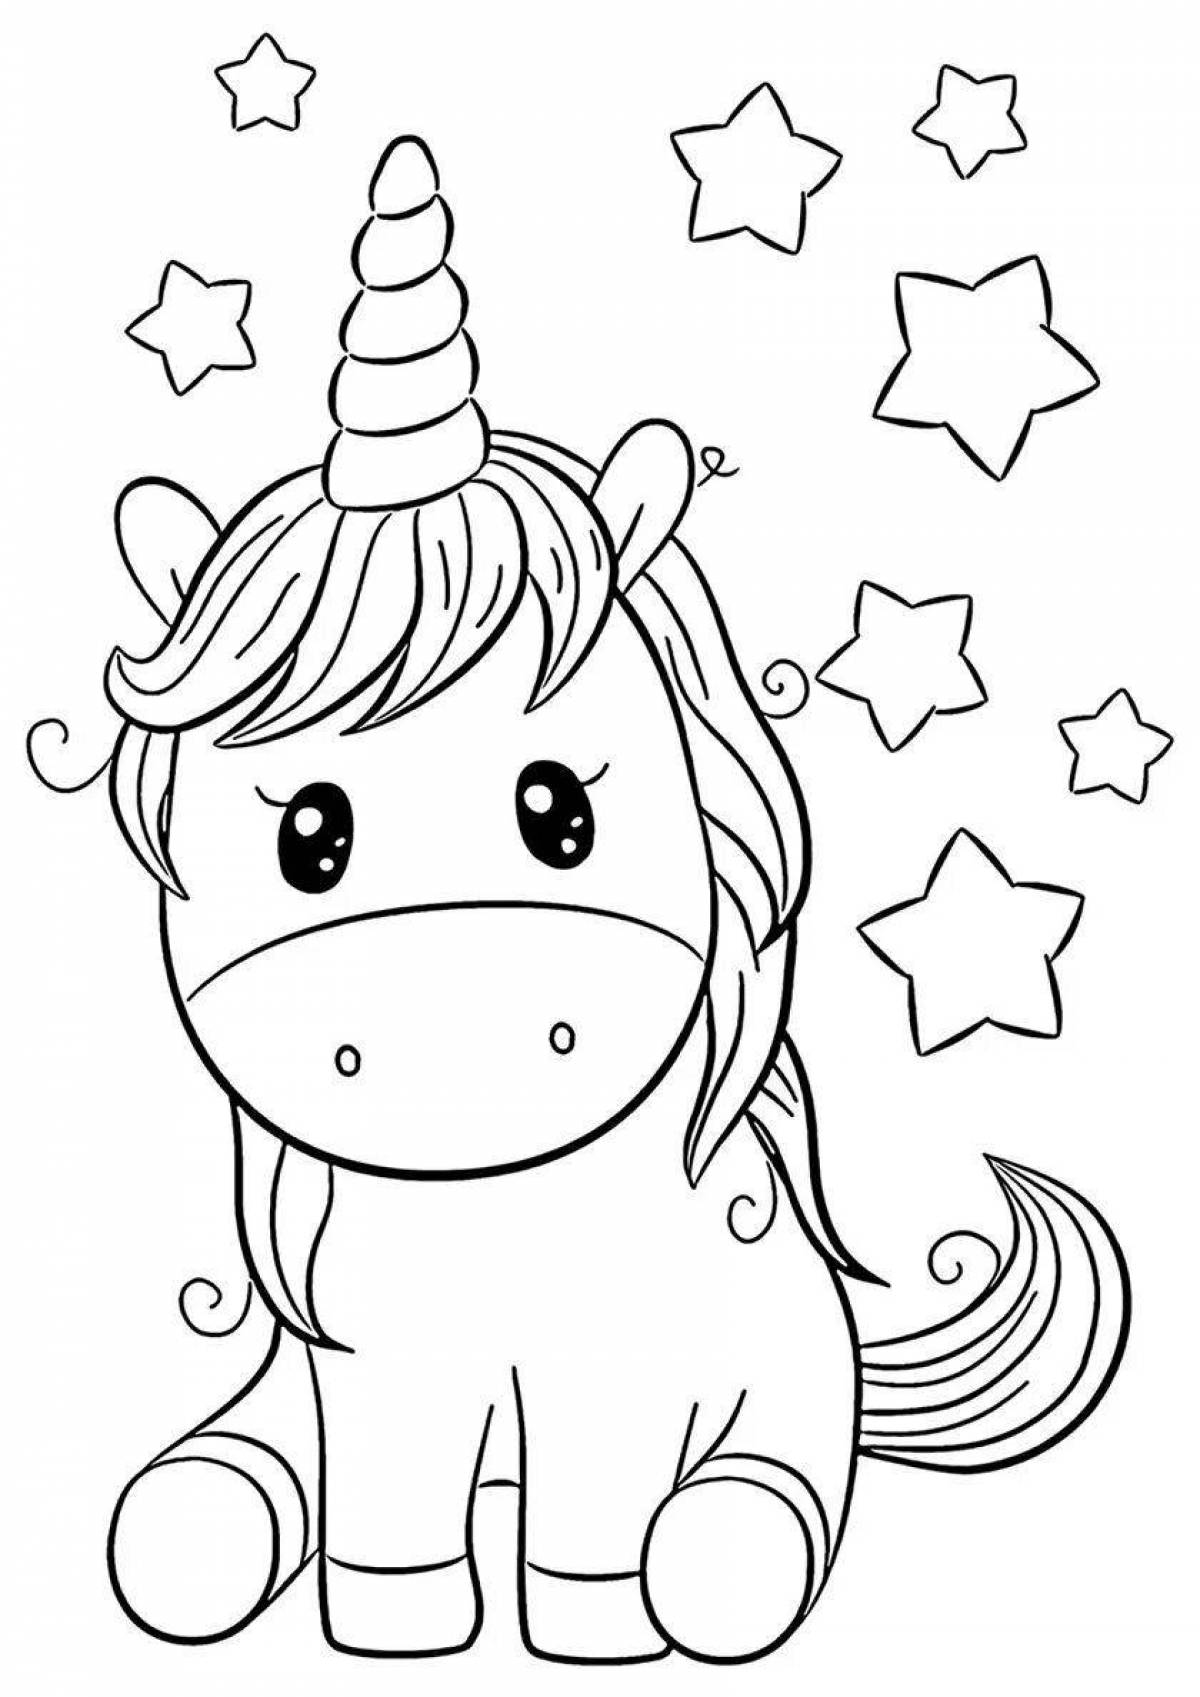 Sparkling unicorn coloring book for kids 4 5